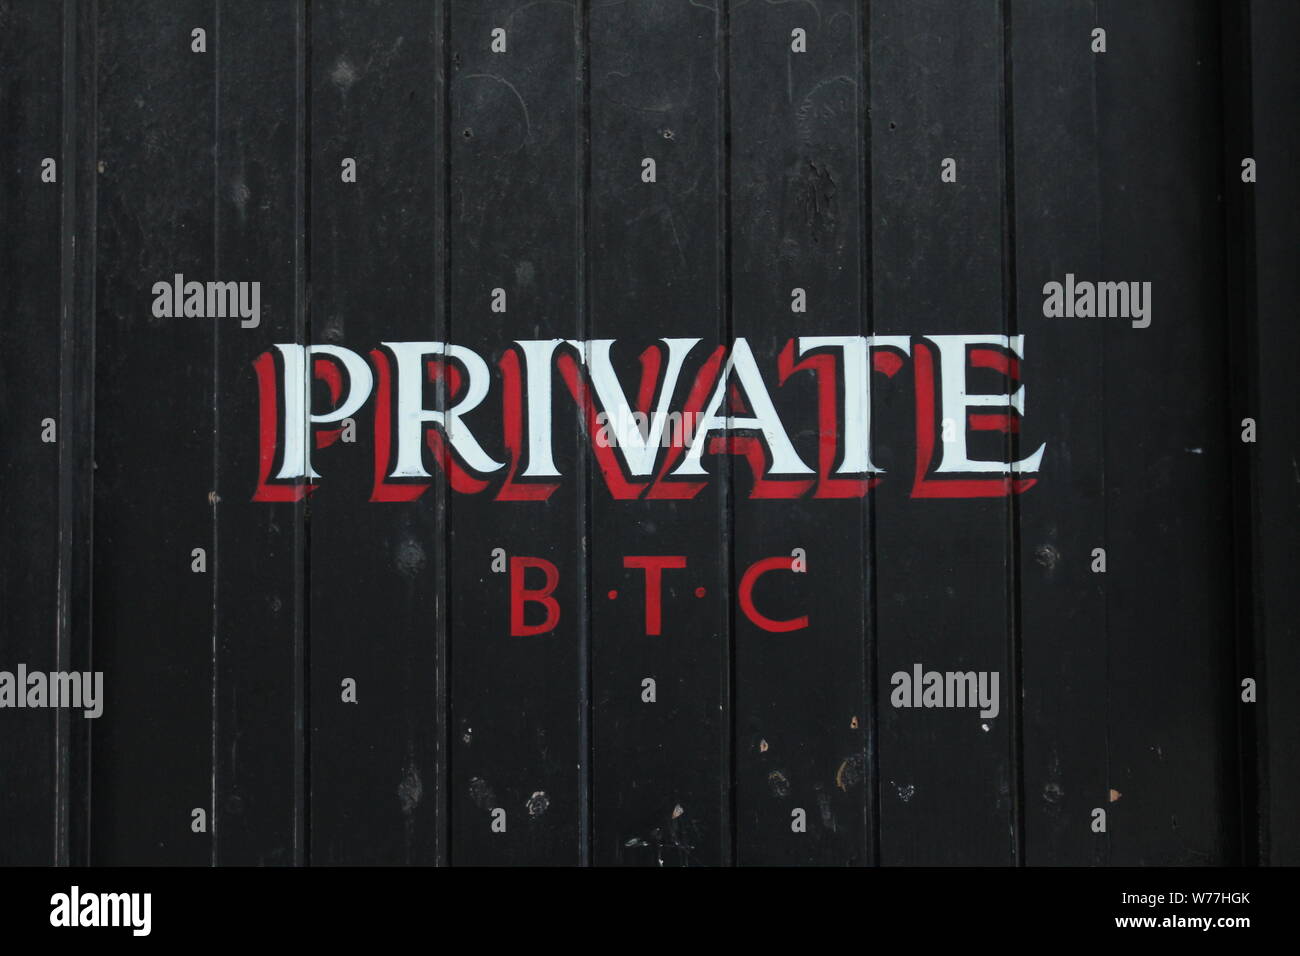 Image of black, wooden door with the word 'private' on in red and white letters, with 'B.T.C' underneath Stock Photo